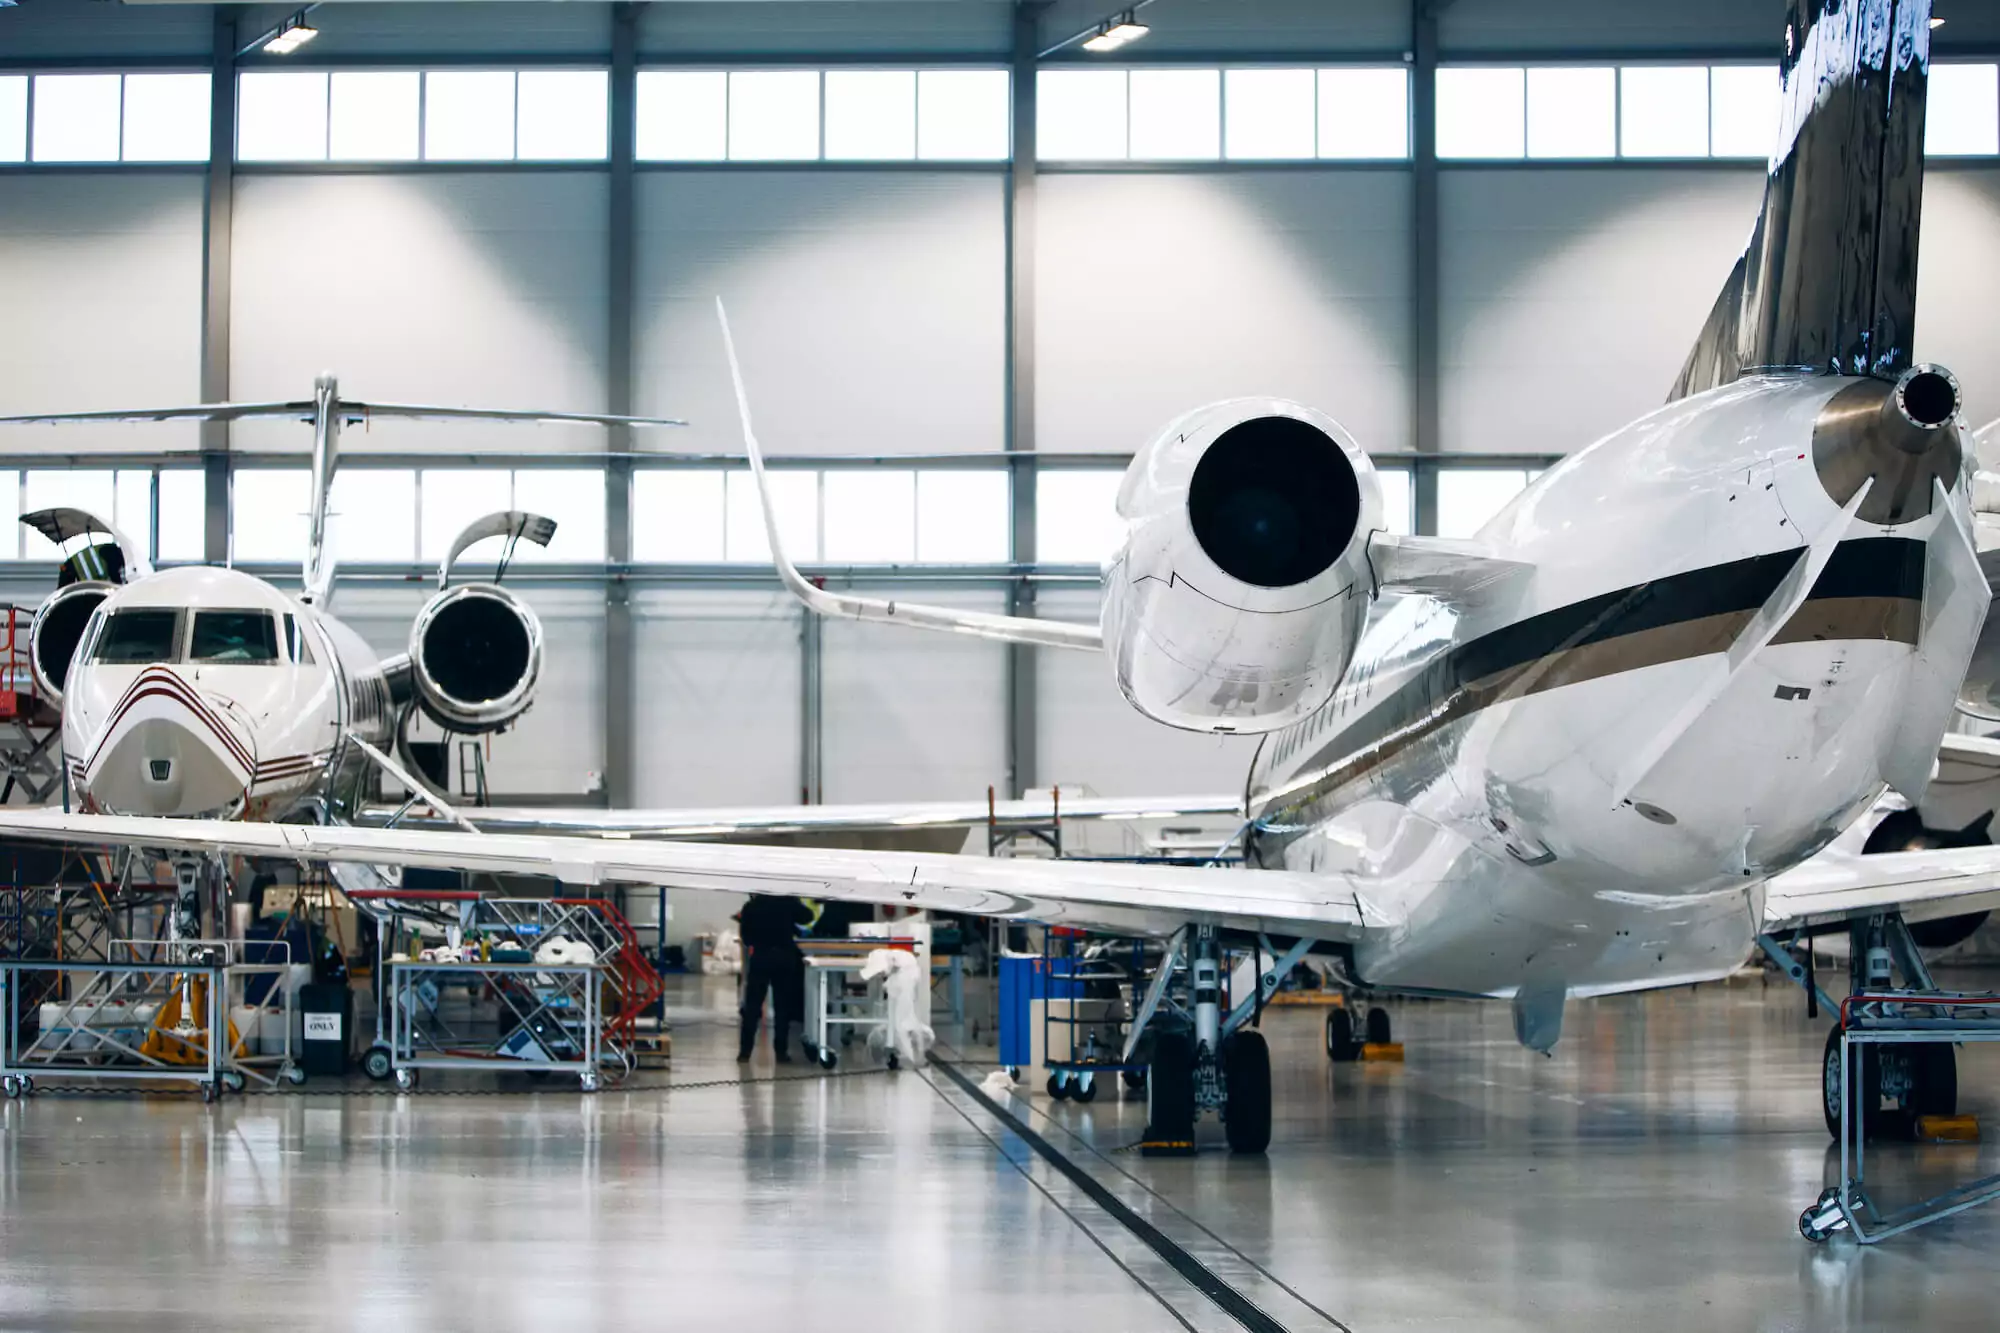 Aircraft in maintenance hangar - using artificial intelligence for predictive private jet maintenance